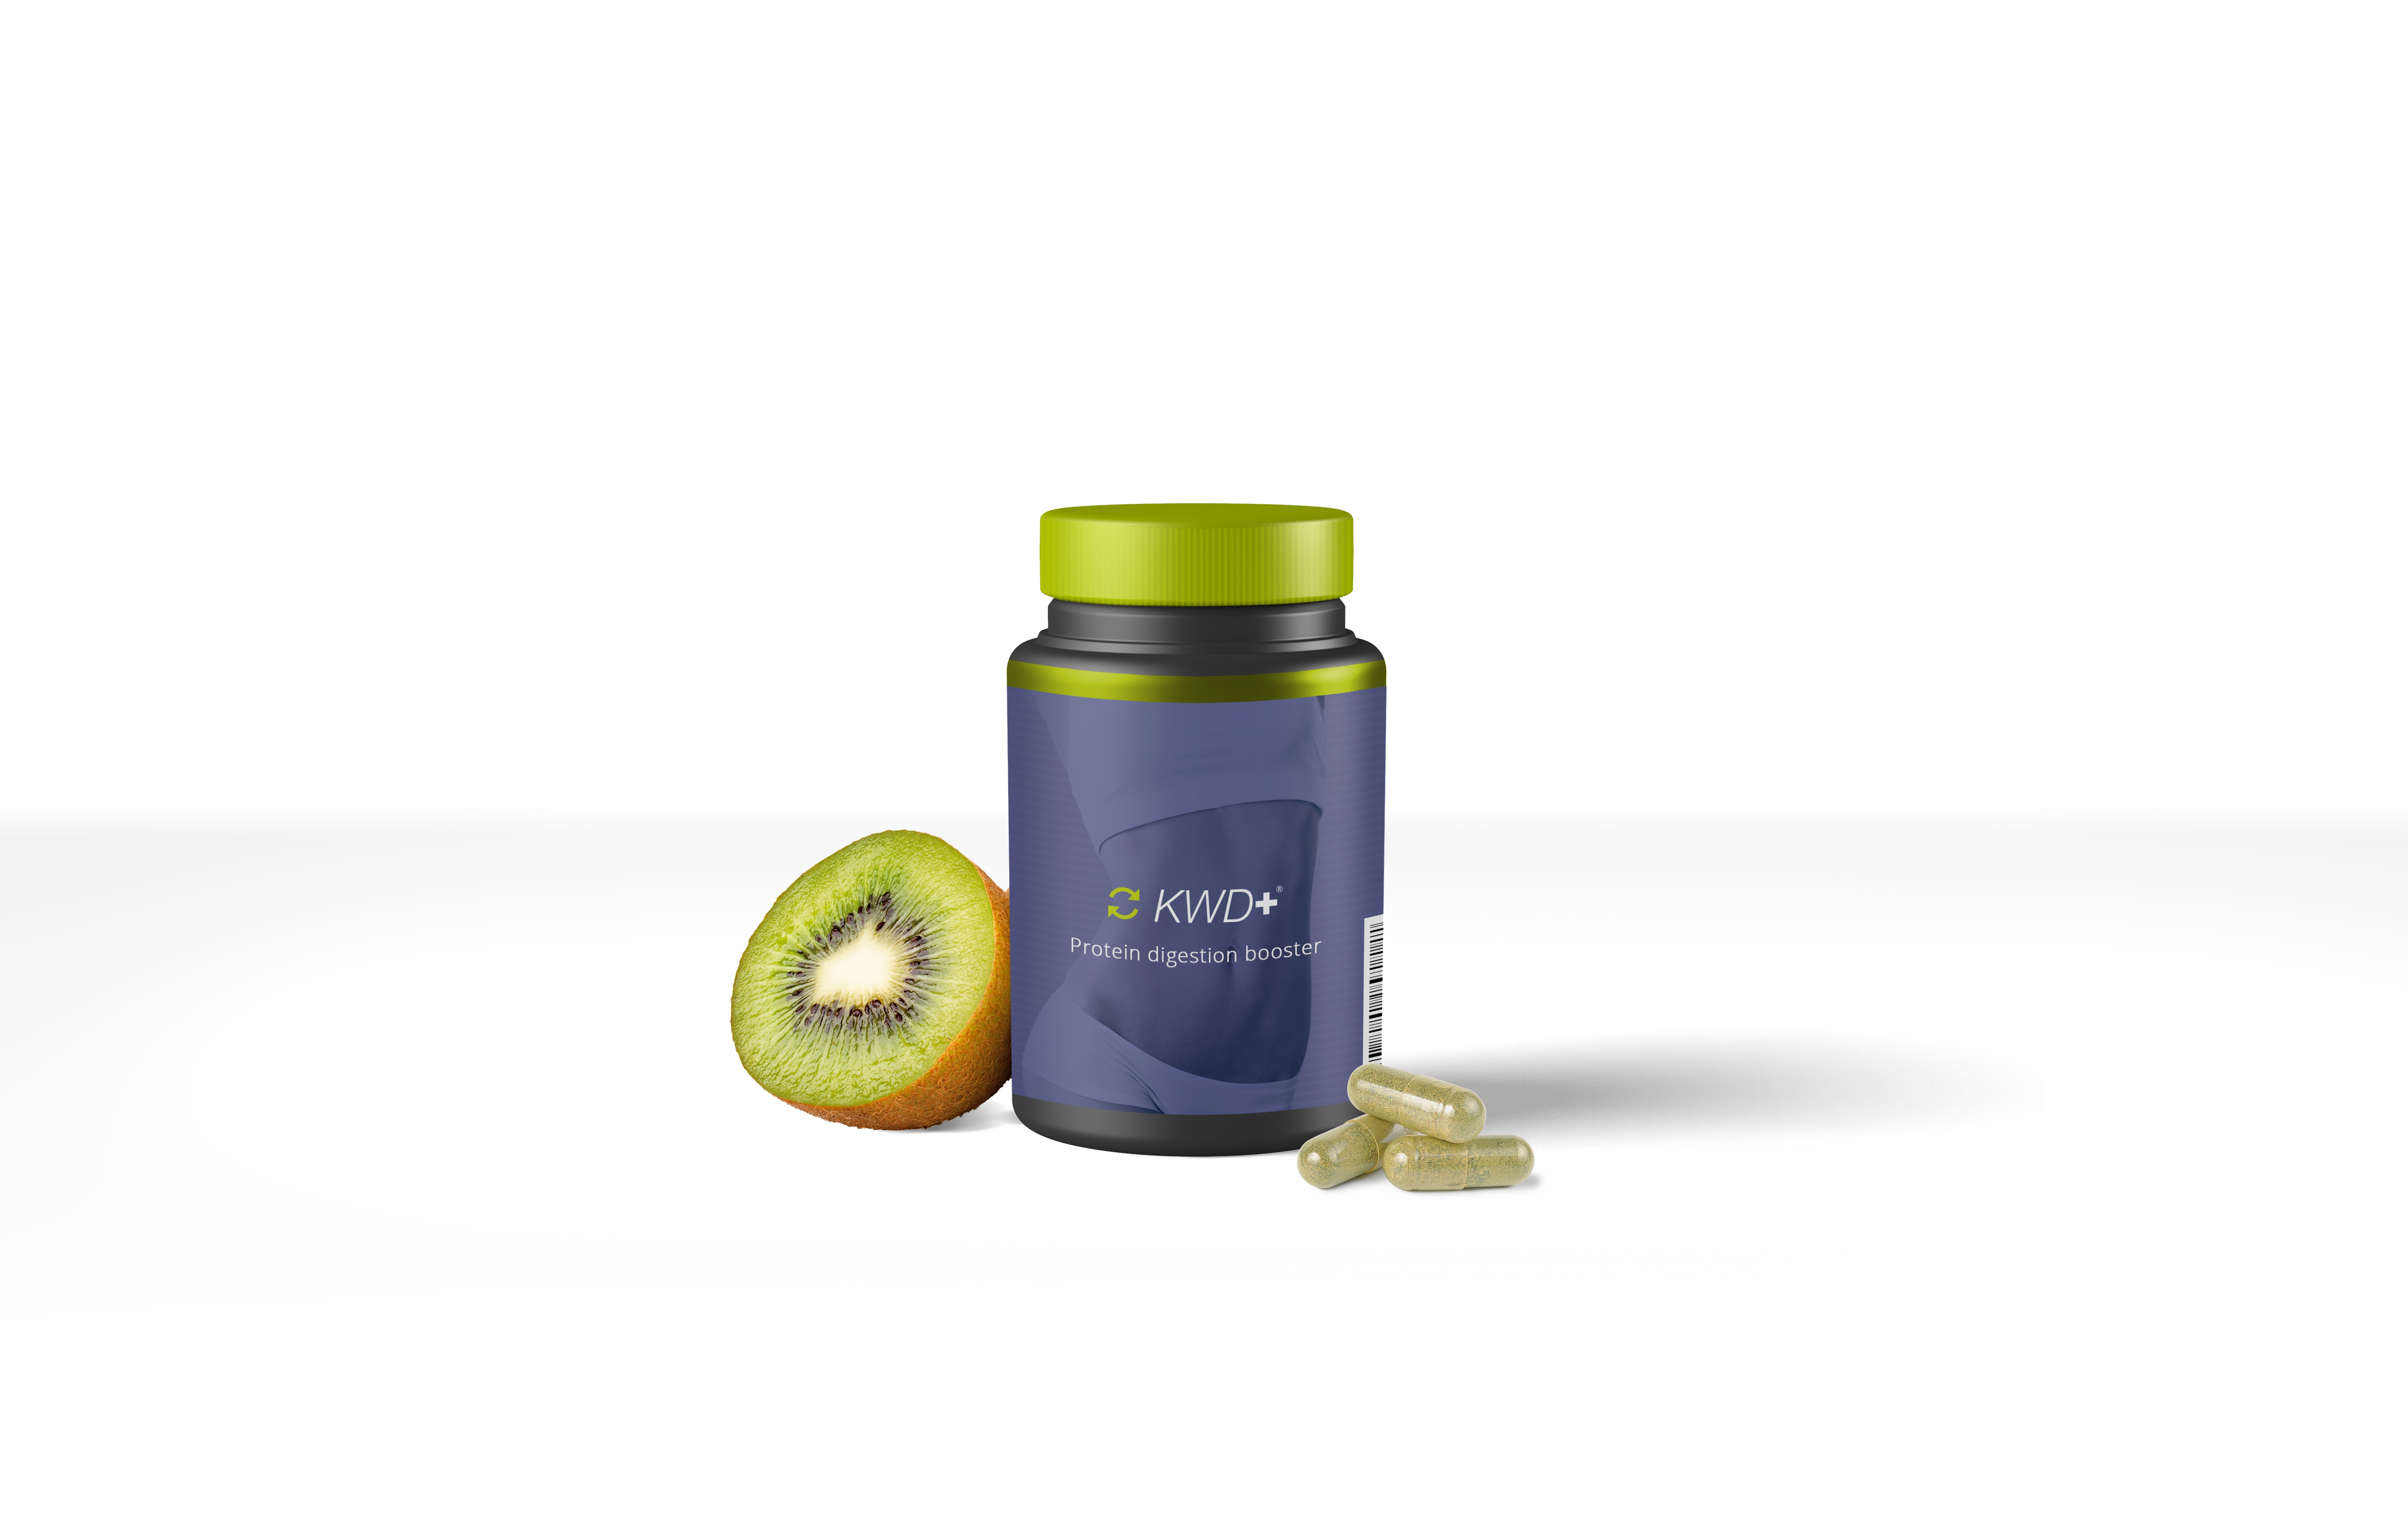 KWD+®. -Protein digestion booster - KIWI EXTRACT